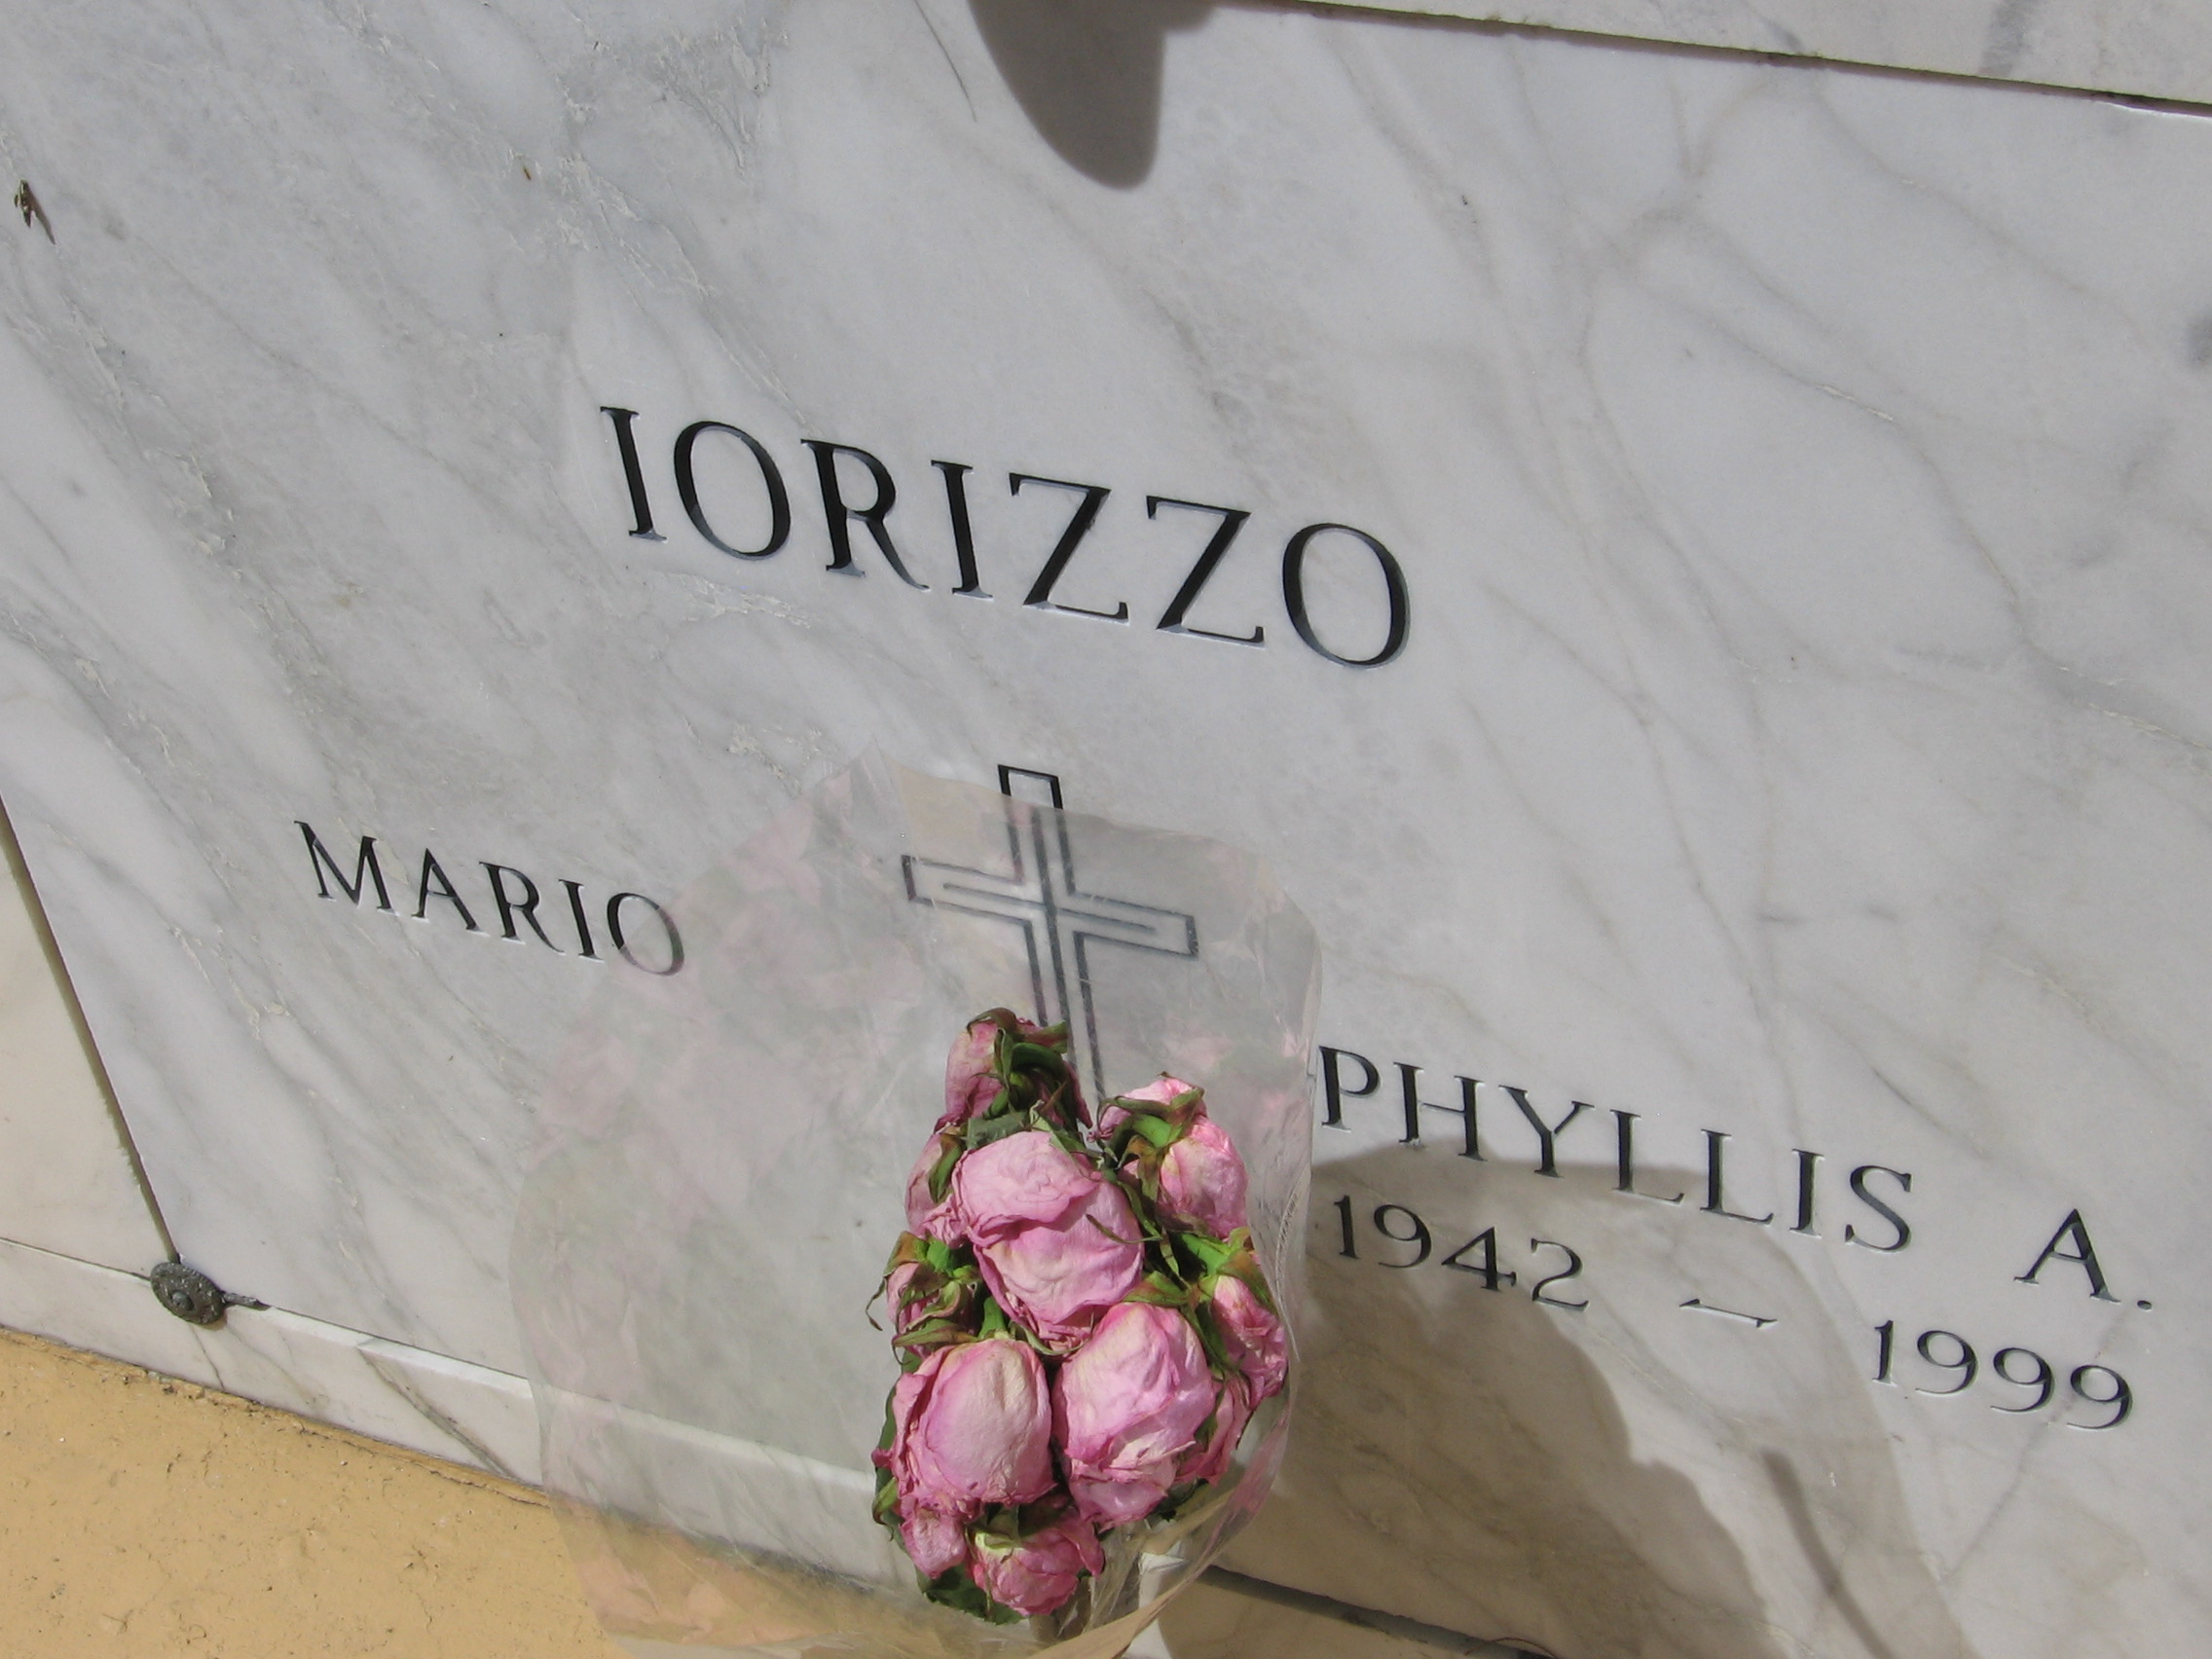 Phyllis A Iorizzo